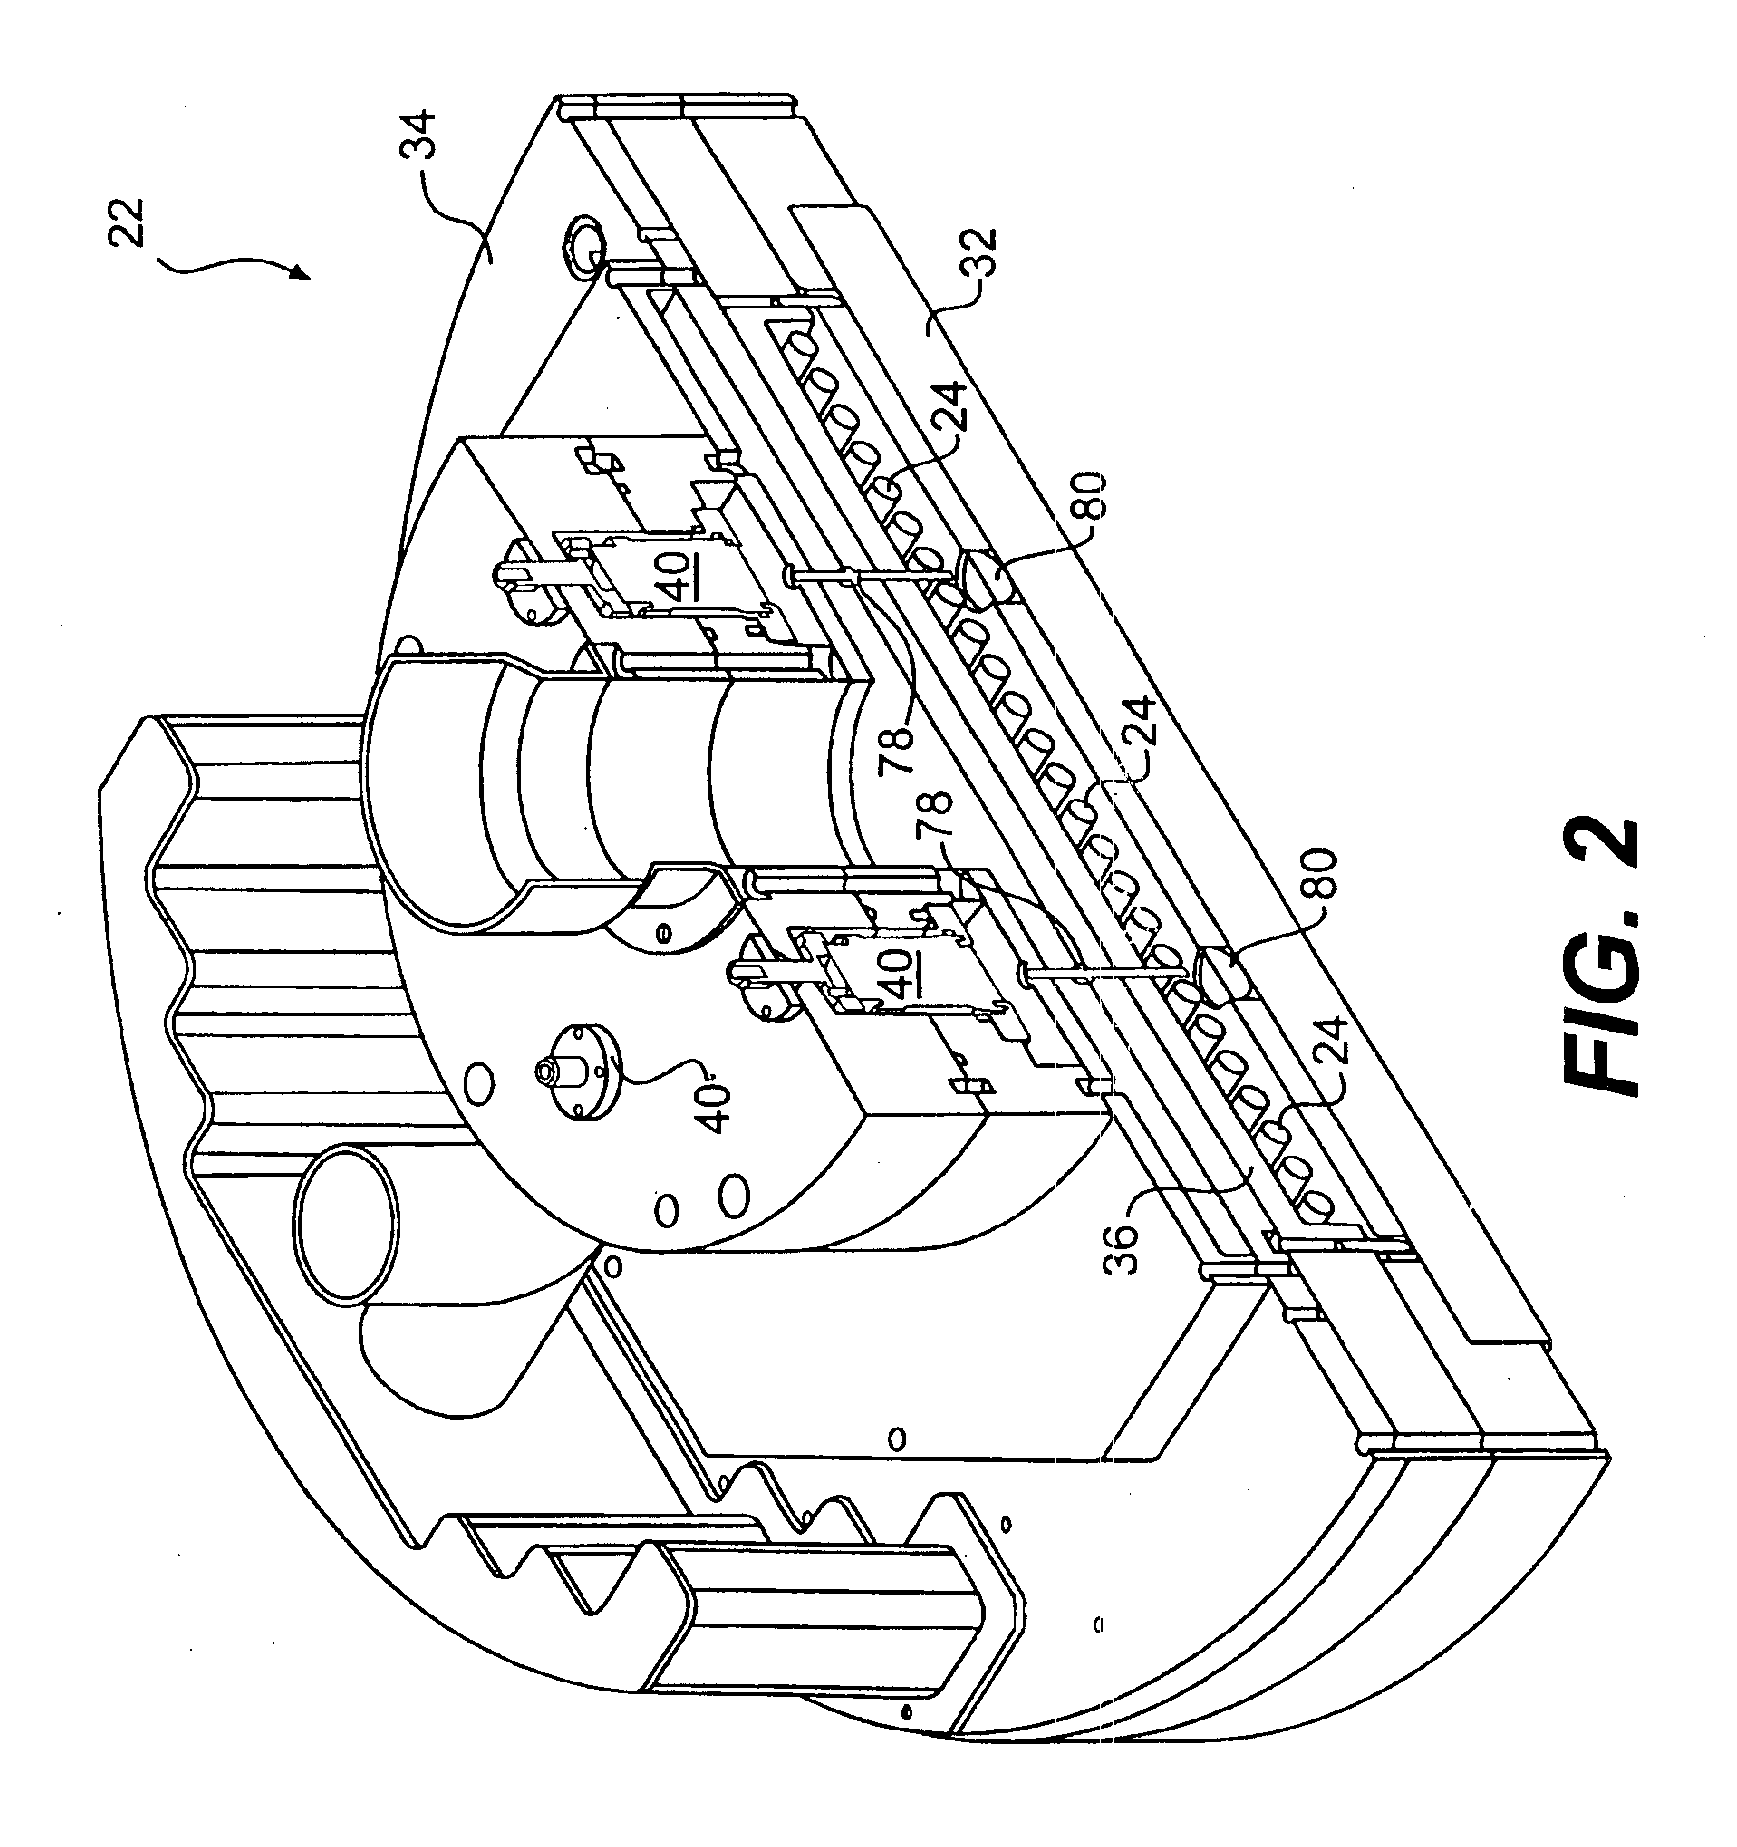 Heating configuration for use in thermal processing chambers